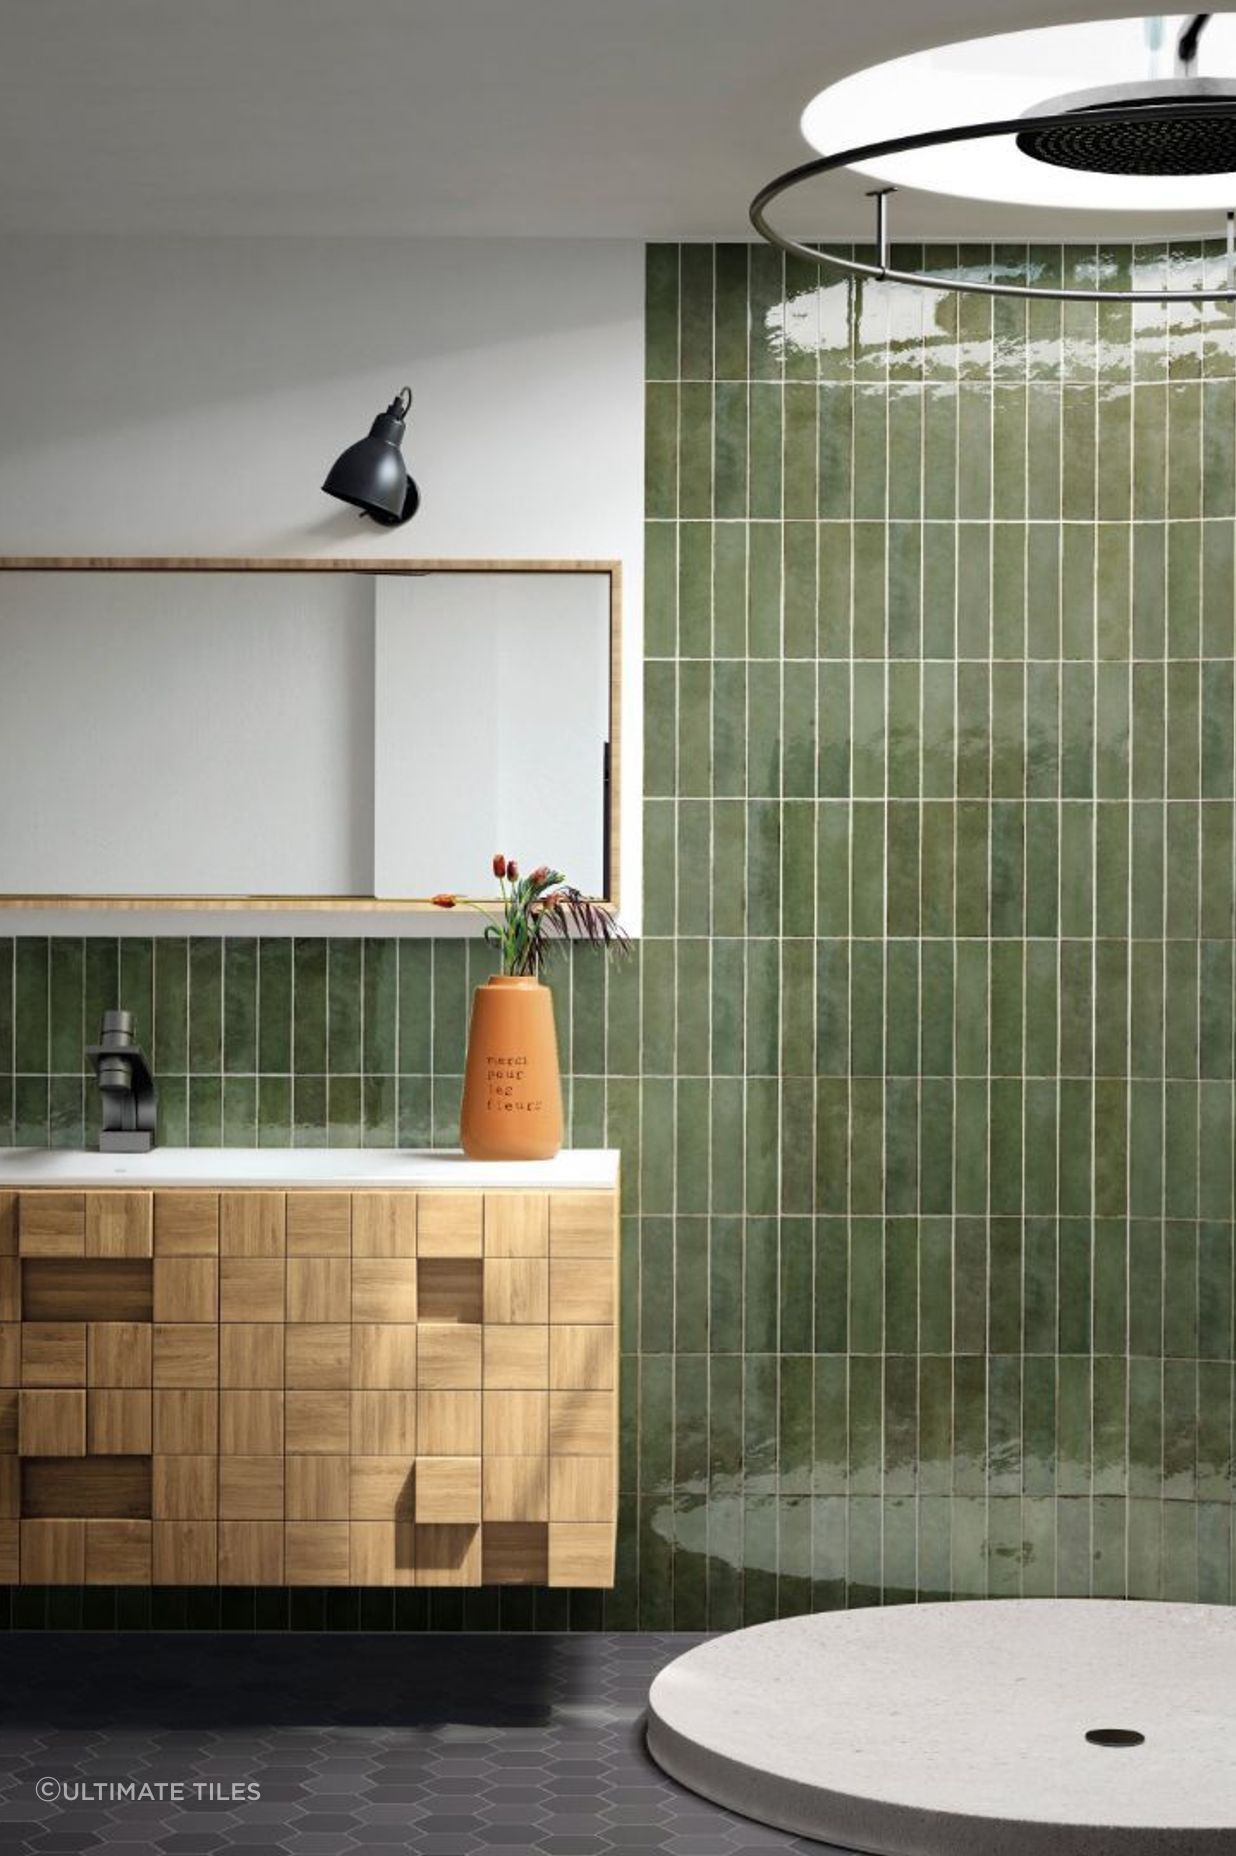 Tribeca Sage Green Subway Tiles from Ultimate Tiles